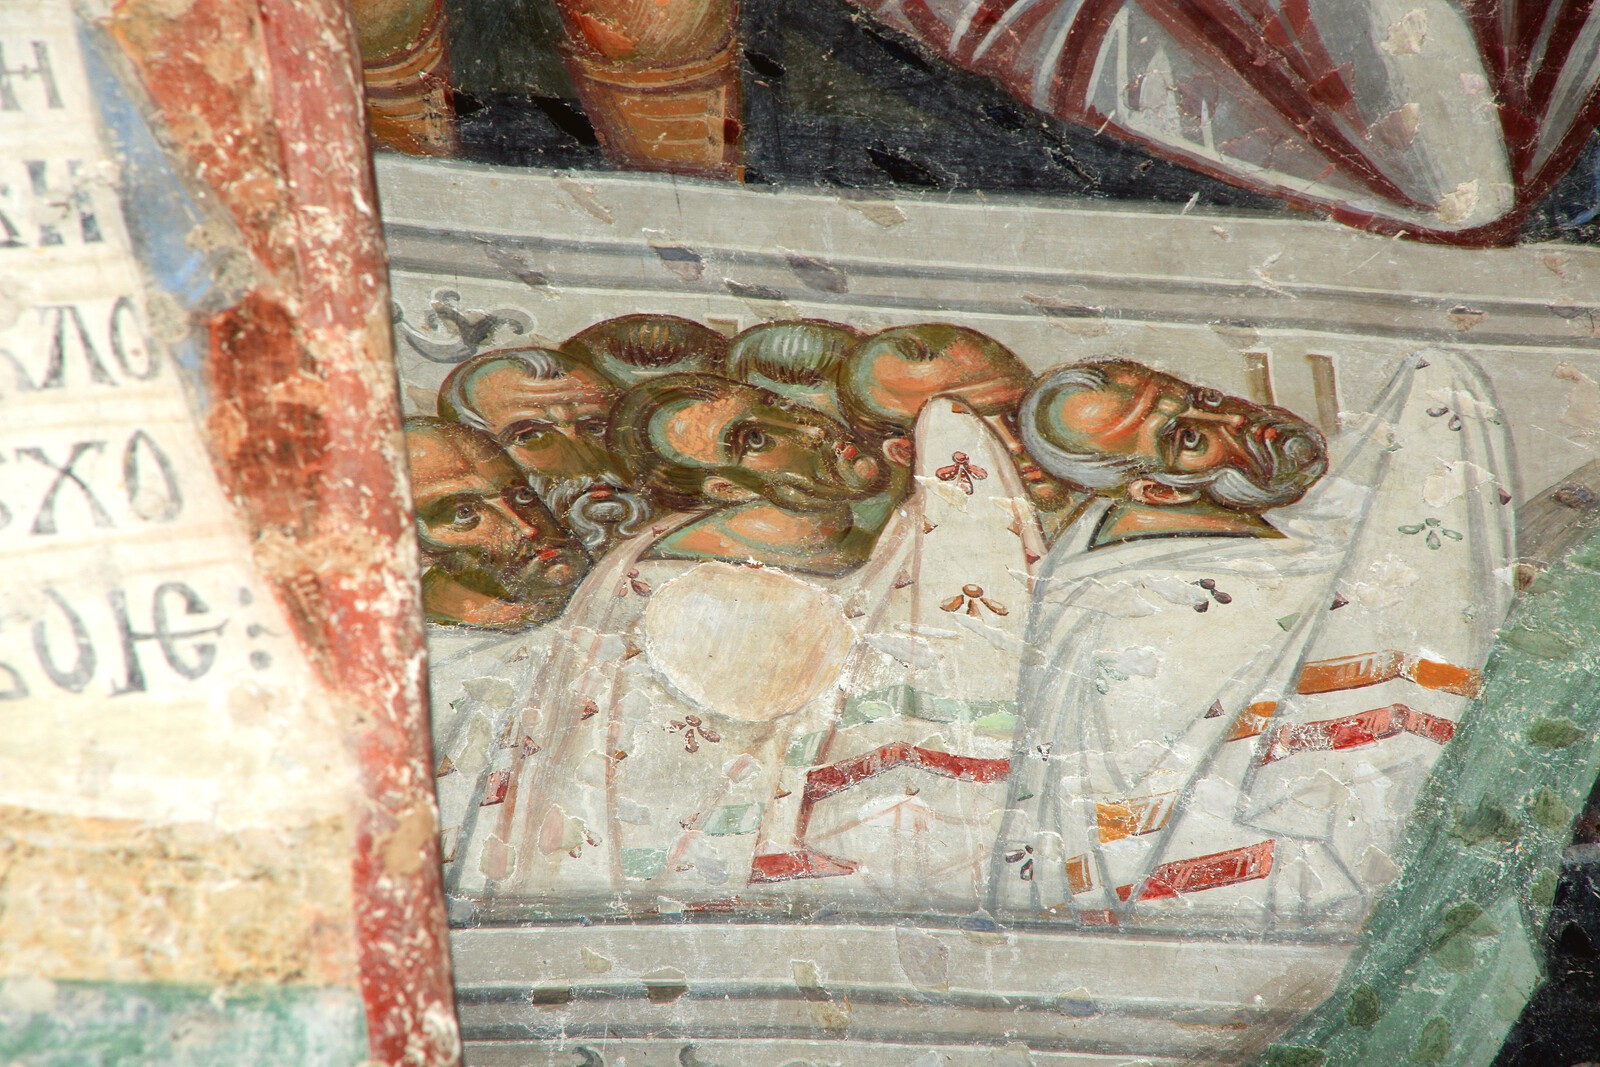 The Descent into Hades, detail